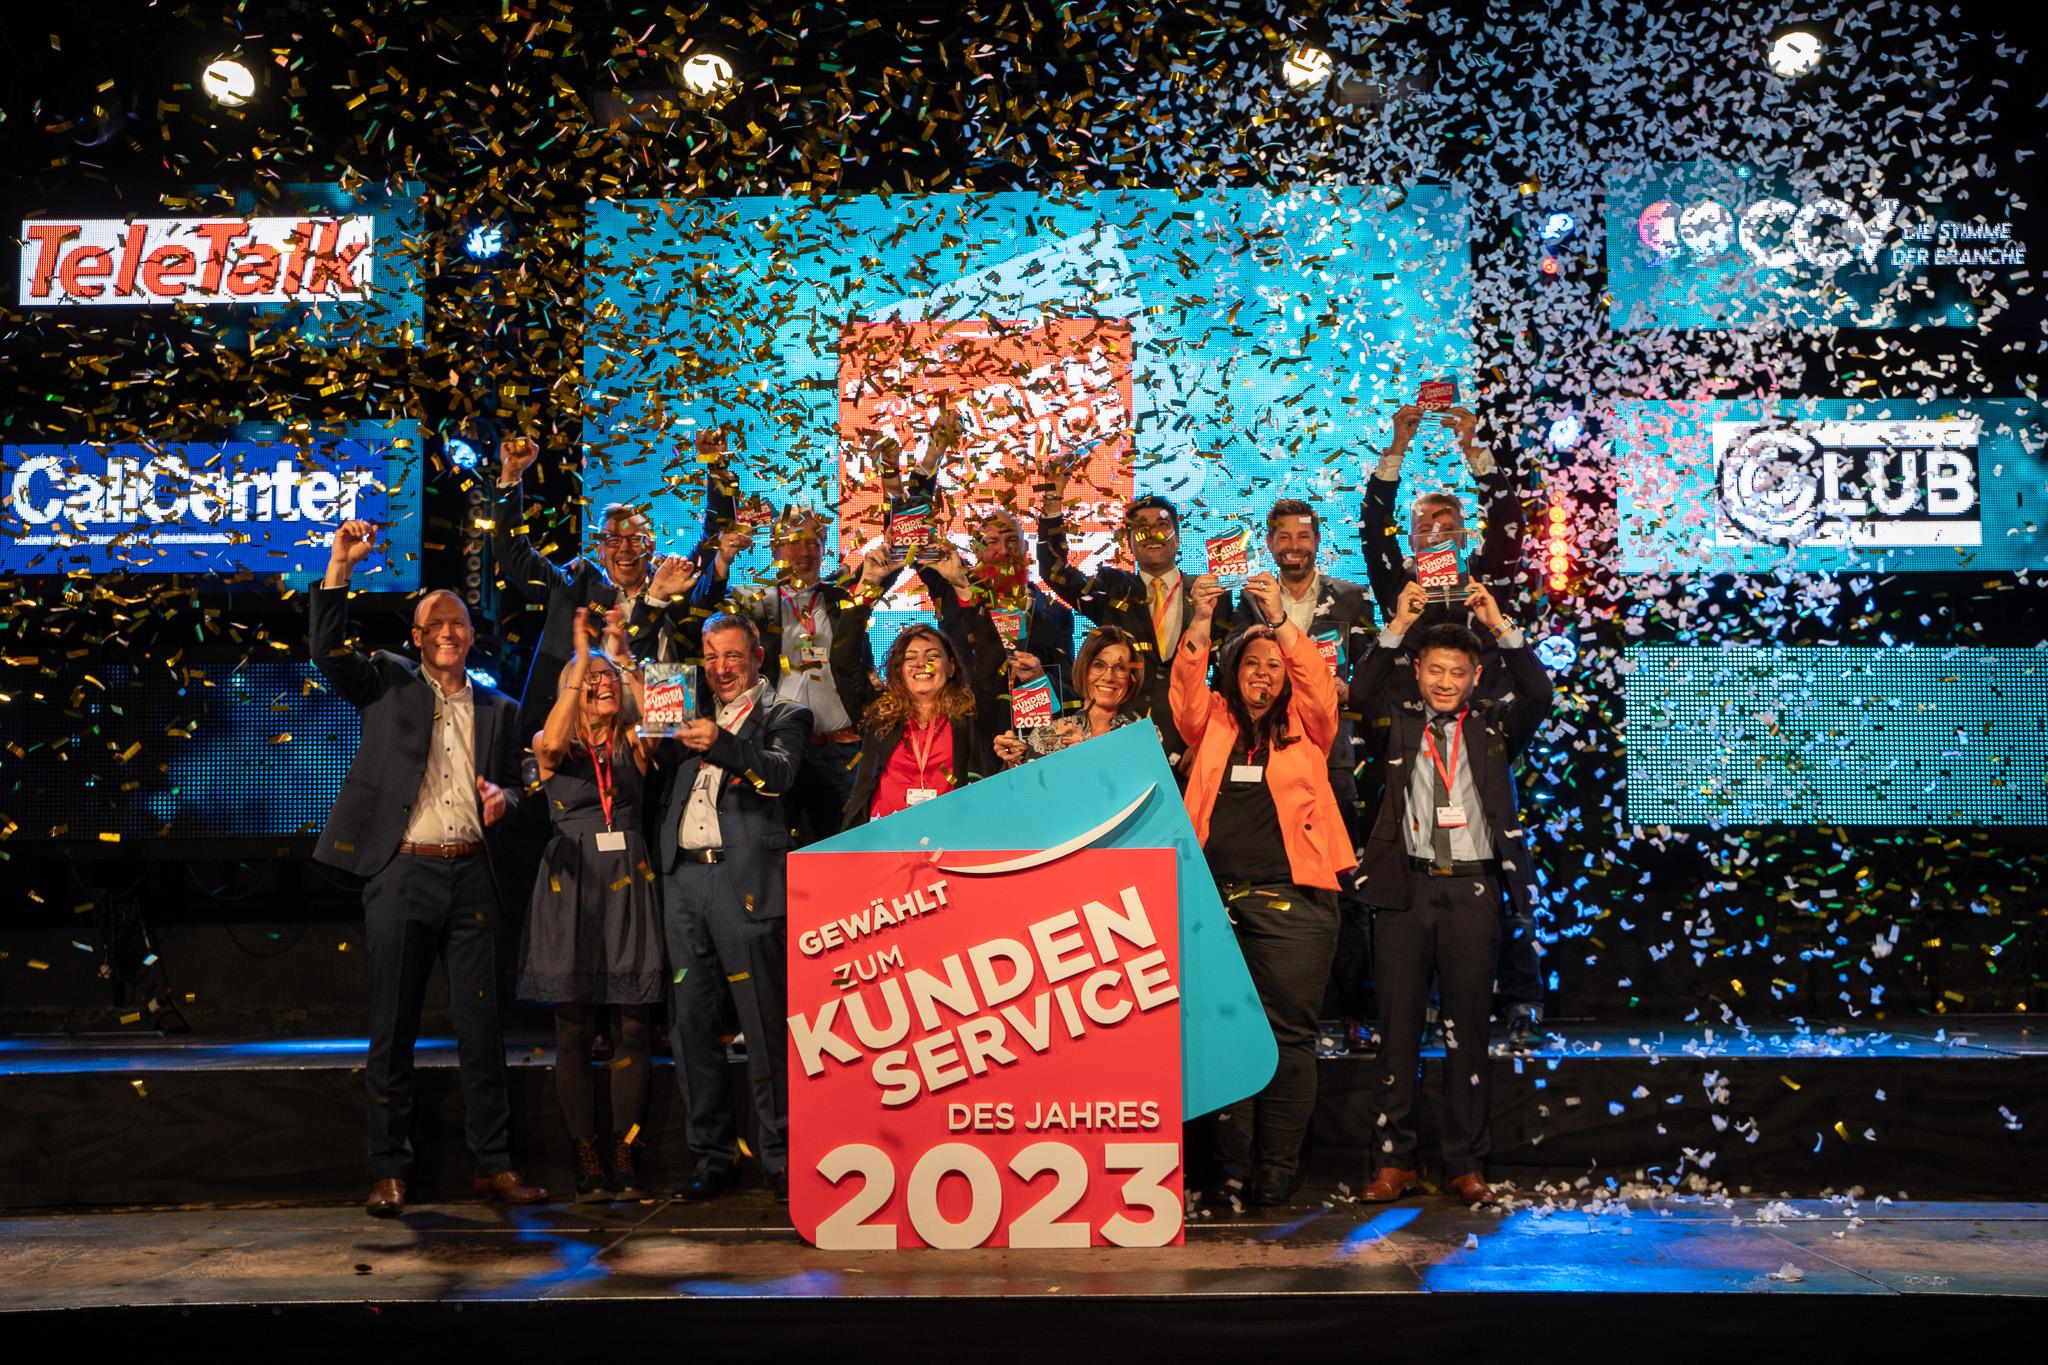 These are the winners of the award 2023!